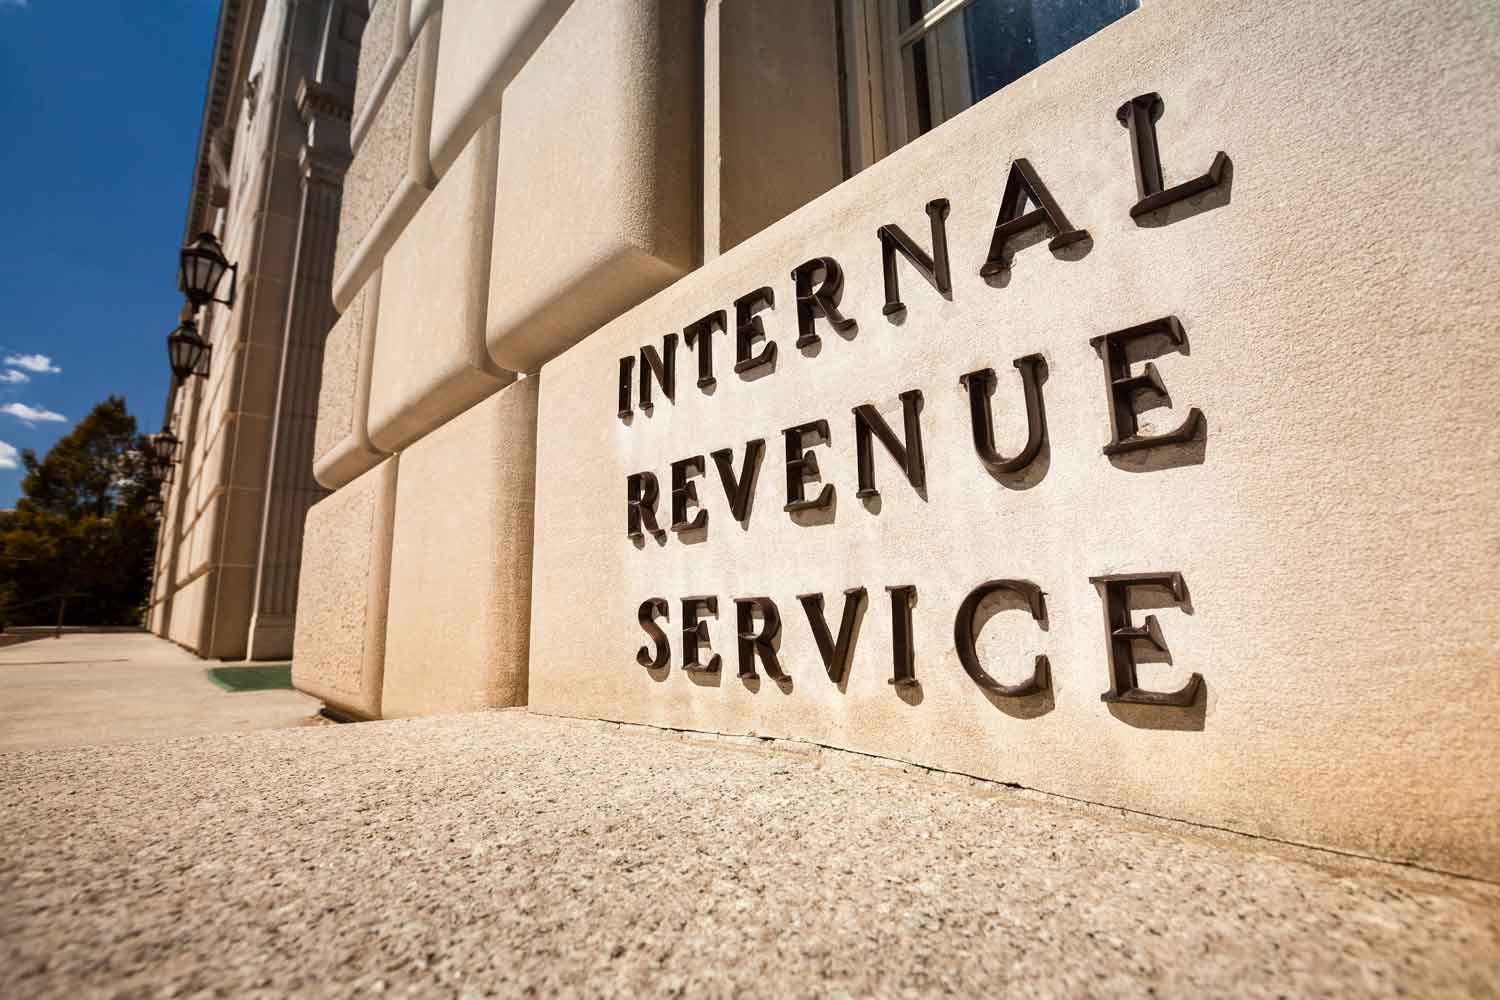 11Low angle building photo with the words "Internal Revenue Service" on the side of the building